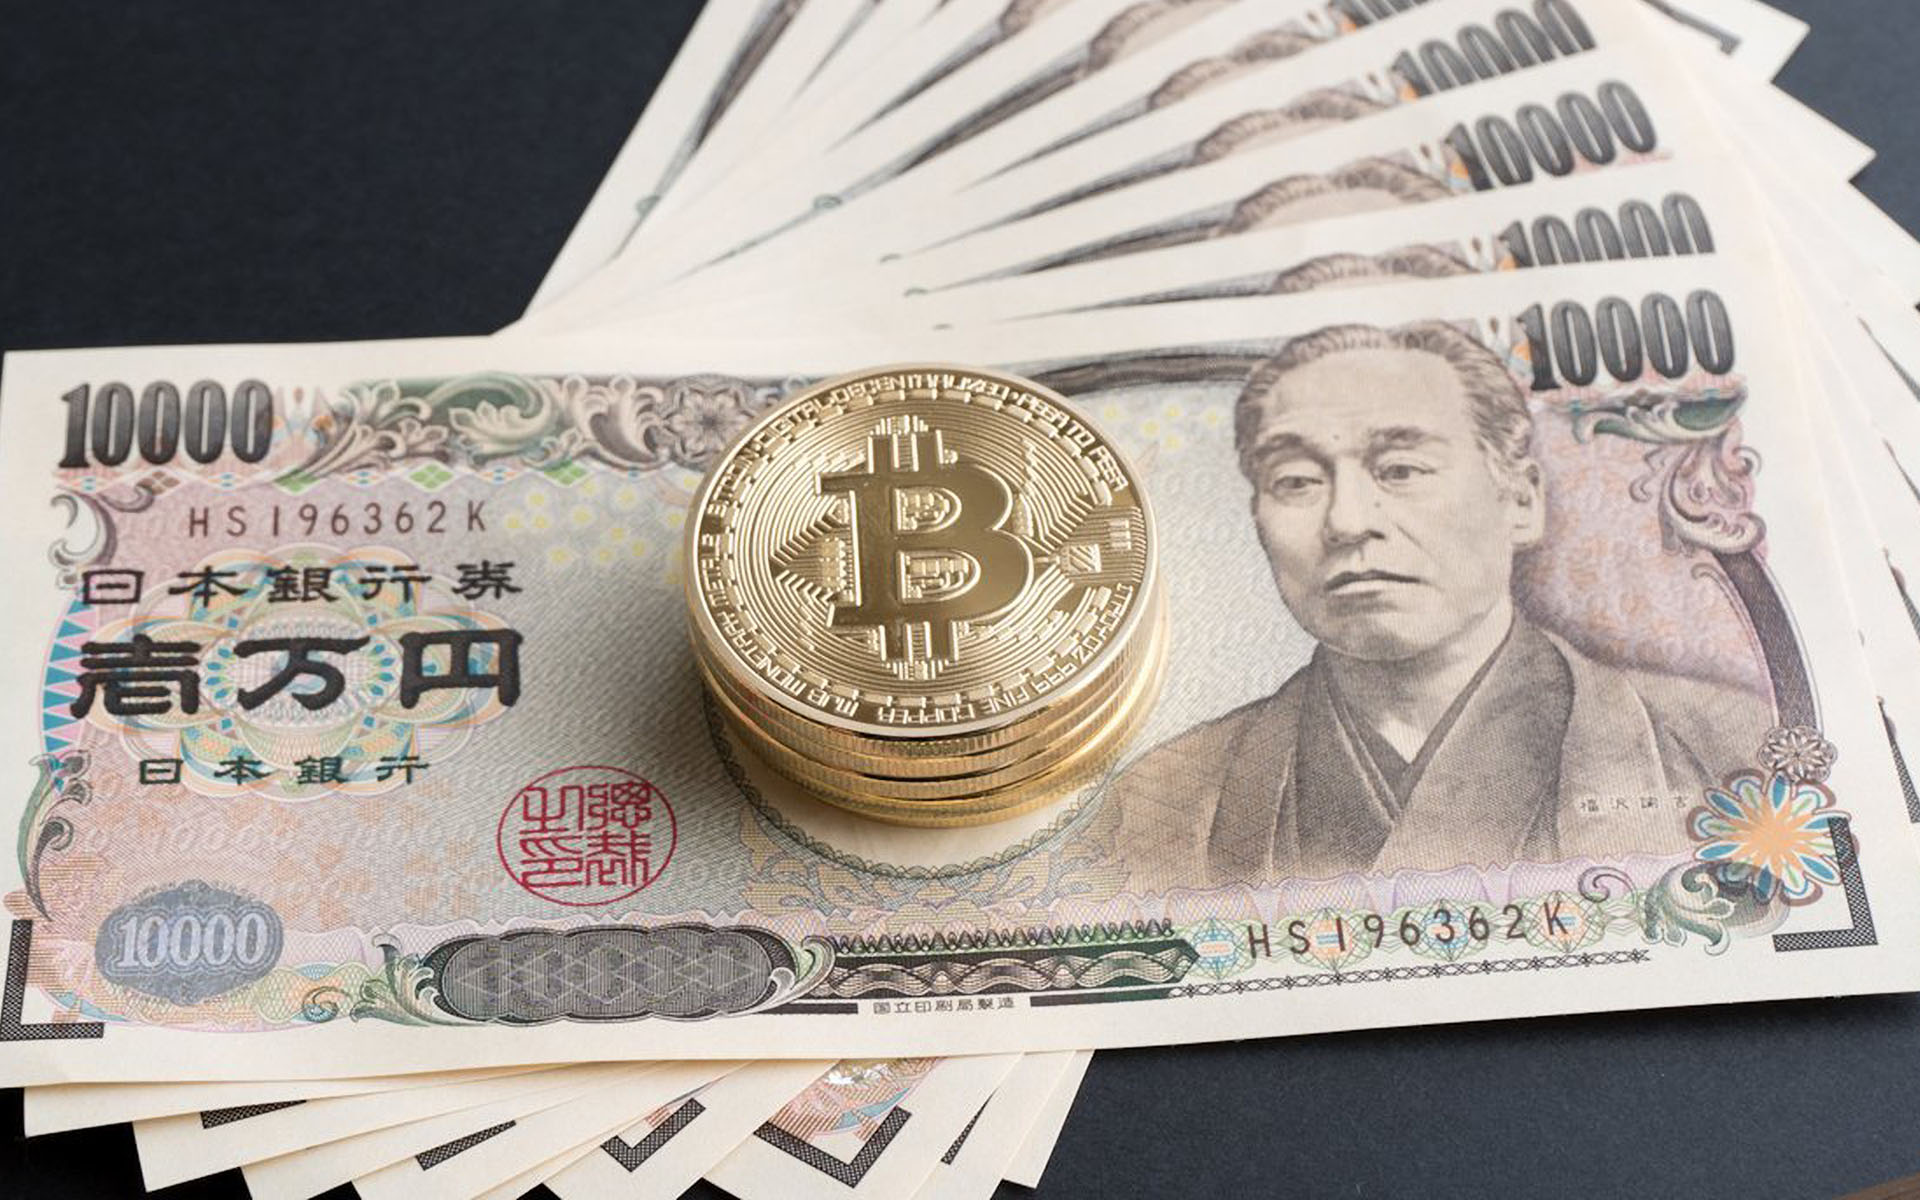 13 Japanese Exchanges to Temporarily Halt Bitcoin Transactions on August 1